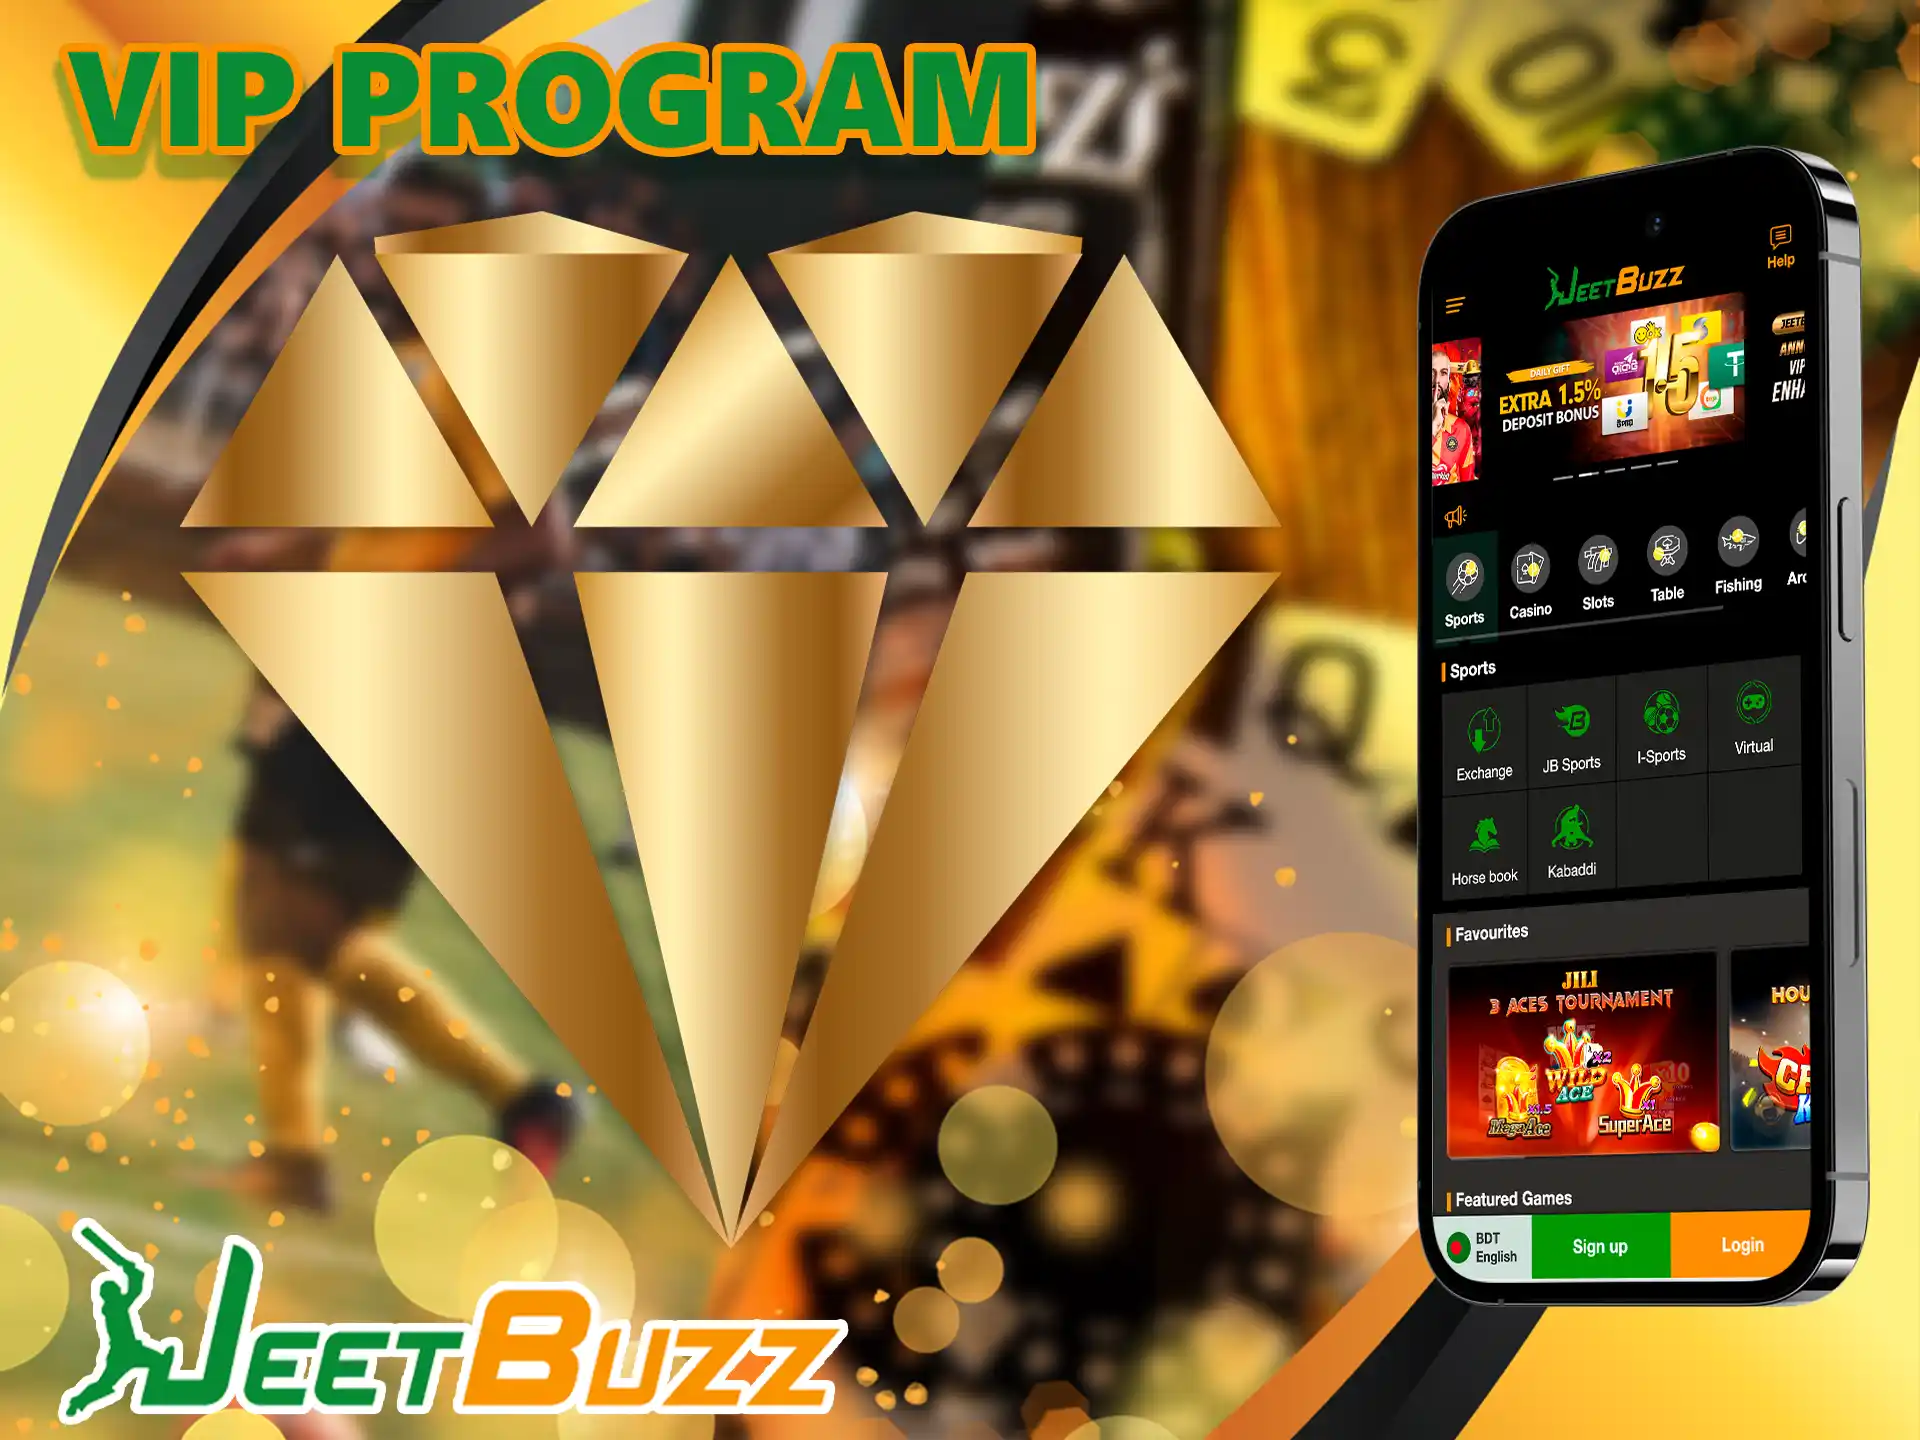 Get special privileges earn points various rewards in JeetBuzz App.